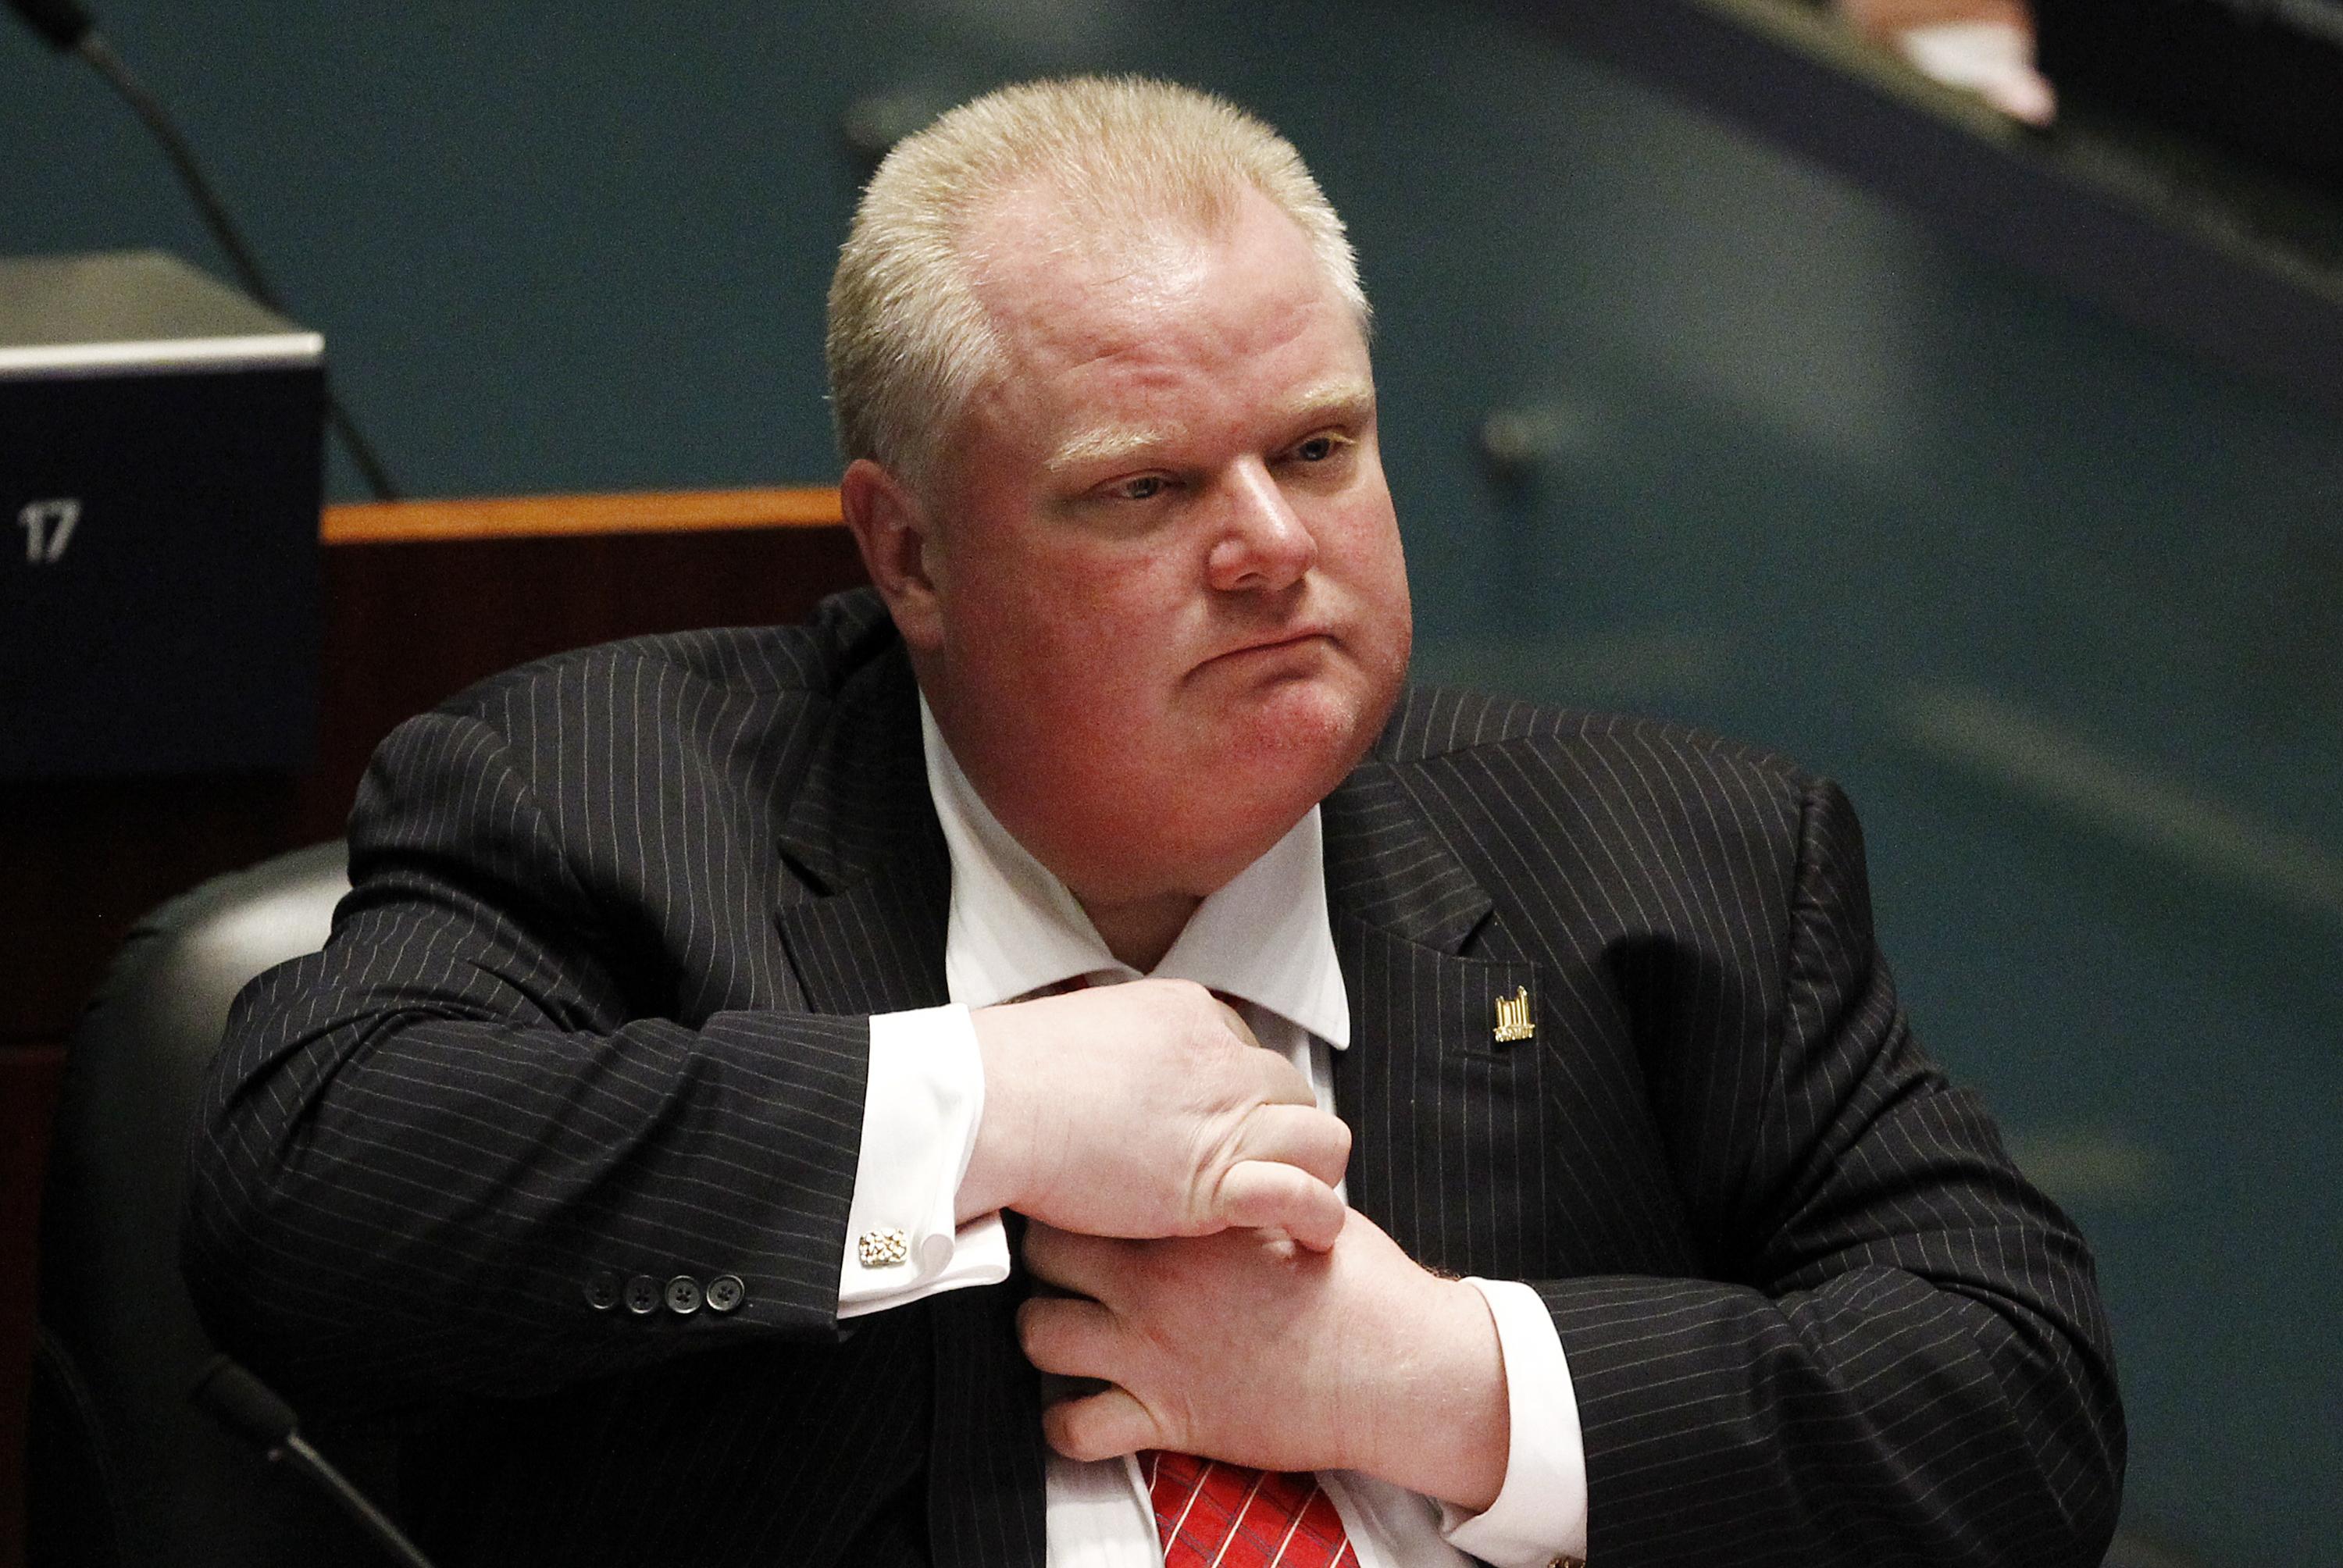 Toronto Mayor Rob Ford at a special council meeting in City Hall. Photo: Reuters